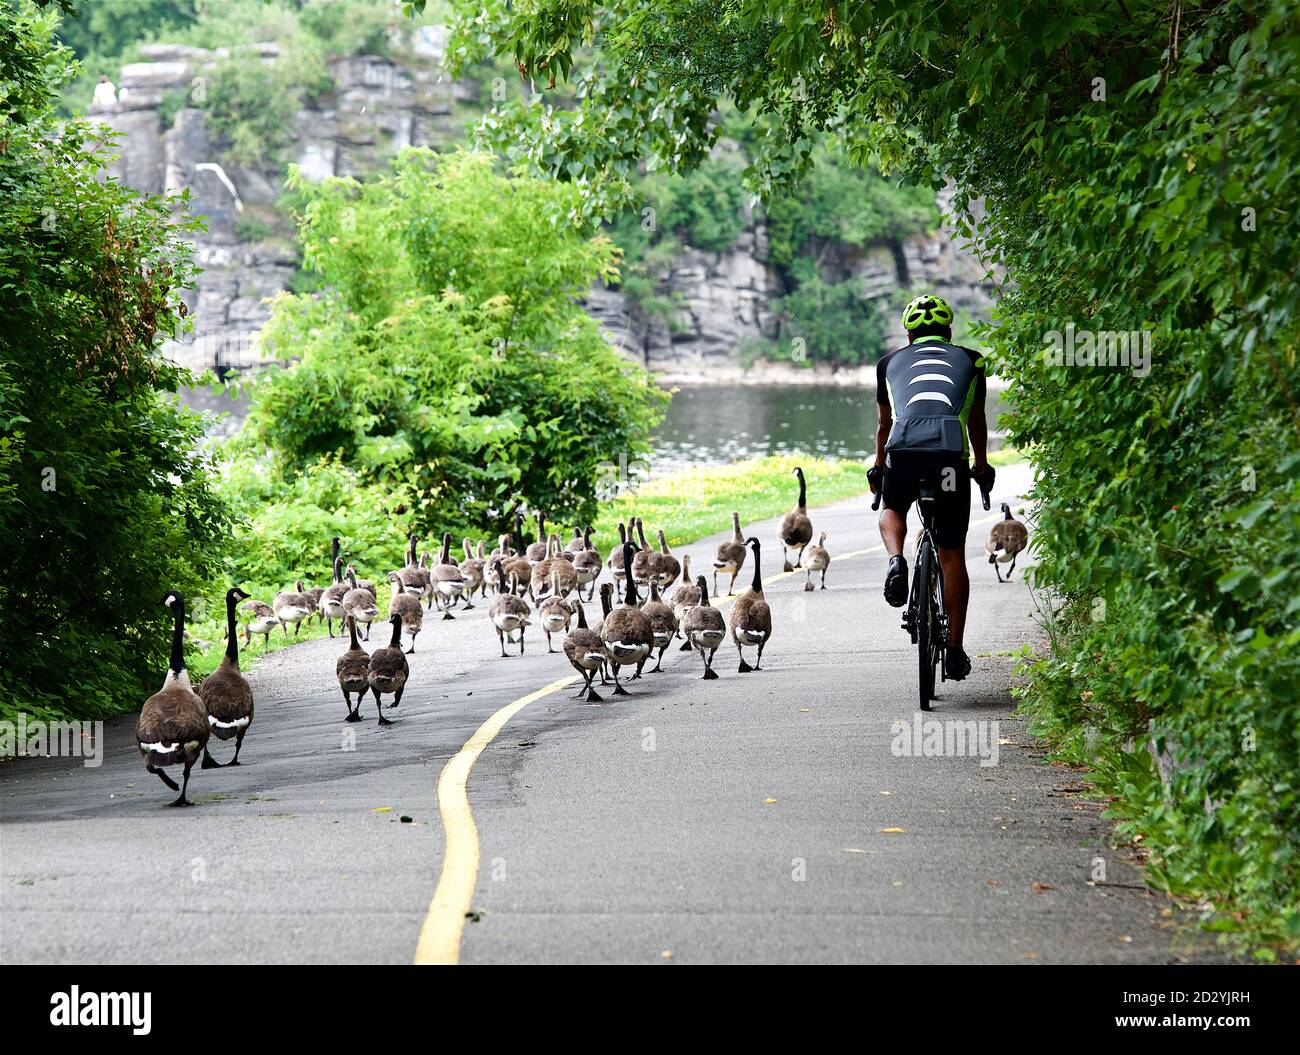 Ottawa, Canada - 13 jul,2016: bicyclist passing group of ducks crossing road in the park in the city. Wild birds walking in the park in Ottawa, Canada Stock Photo